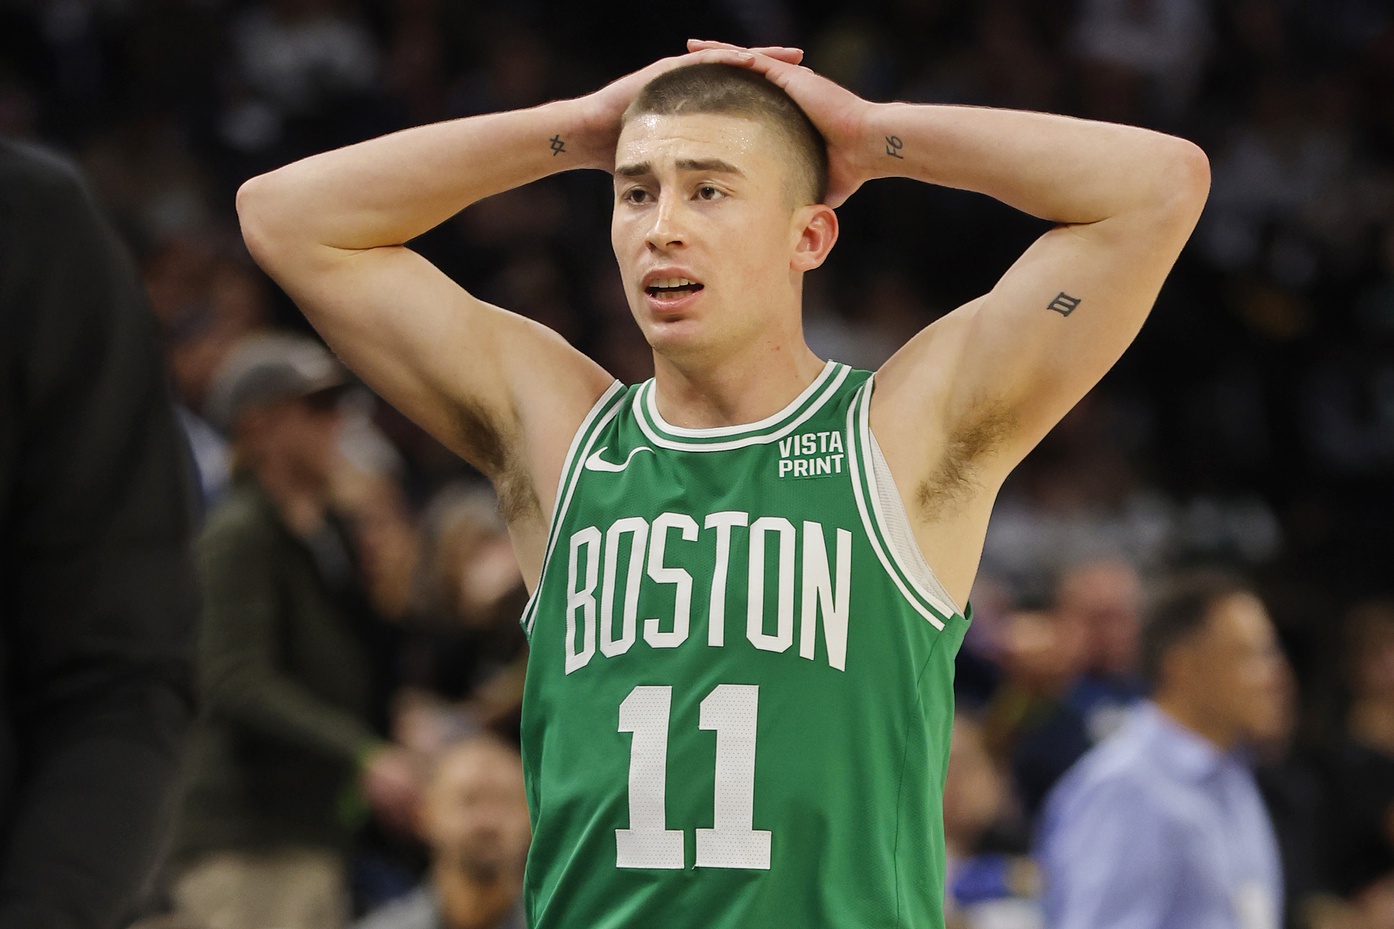 Boston Celtics guard Payton Pritchard (11) reacts to a foul call in the third quarter of the game against the Minnesota Timberwolves at Target Center.